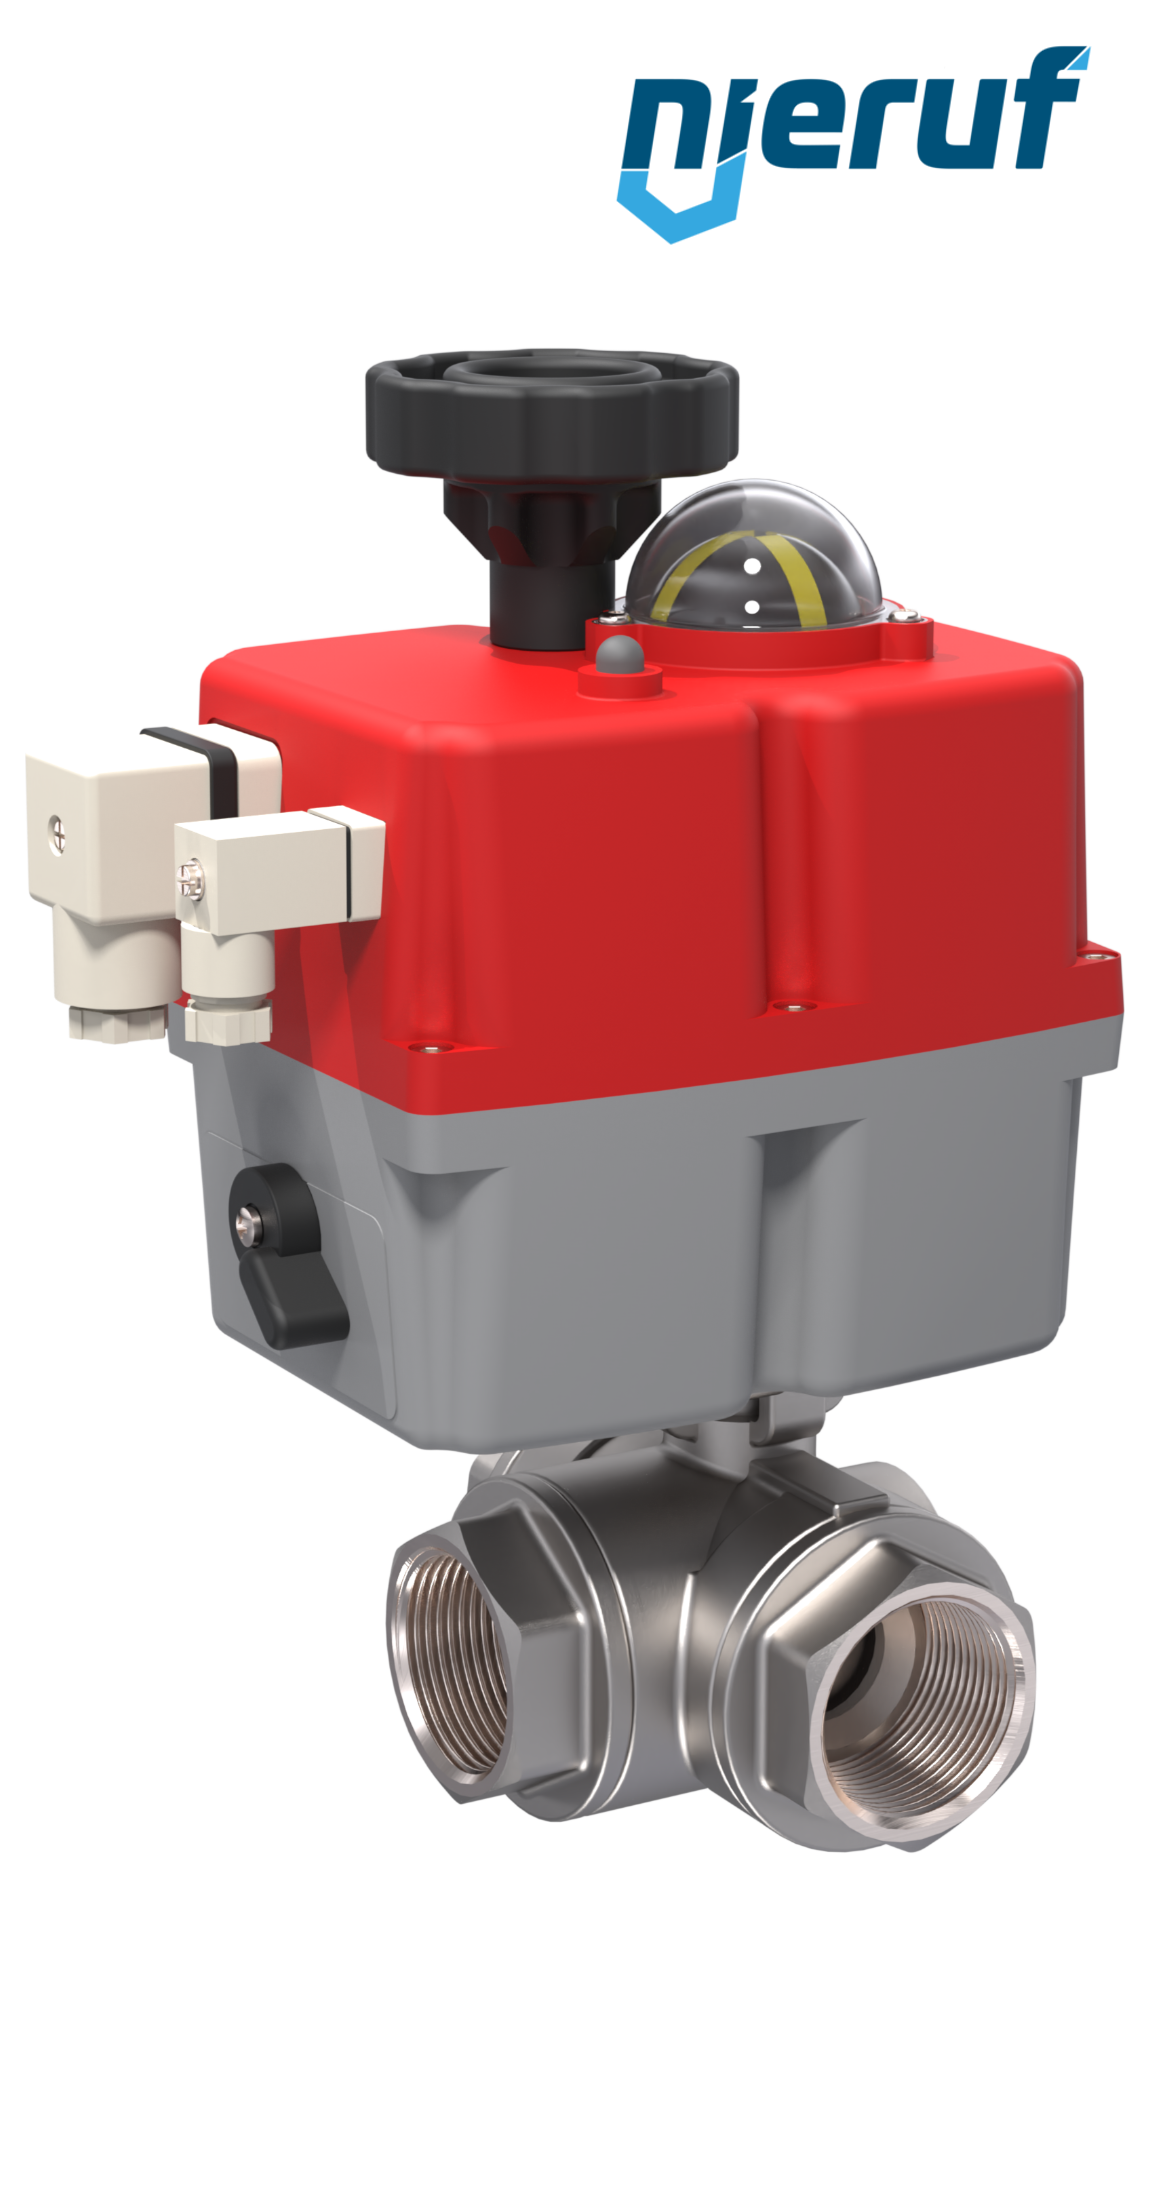 3 way automatic-ball valve 24-240V DN25 - 1" inch stainless steel reduced port design with L drilling